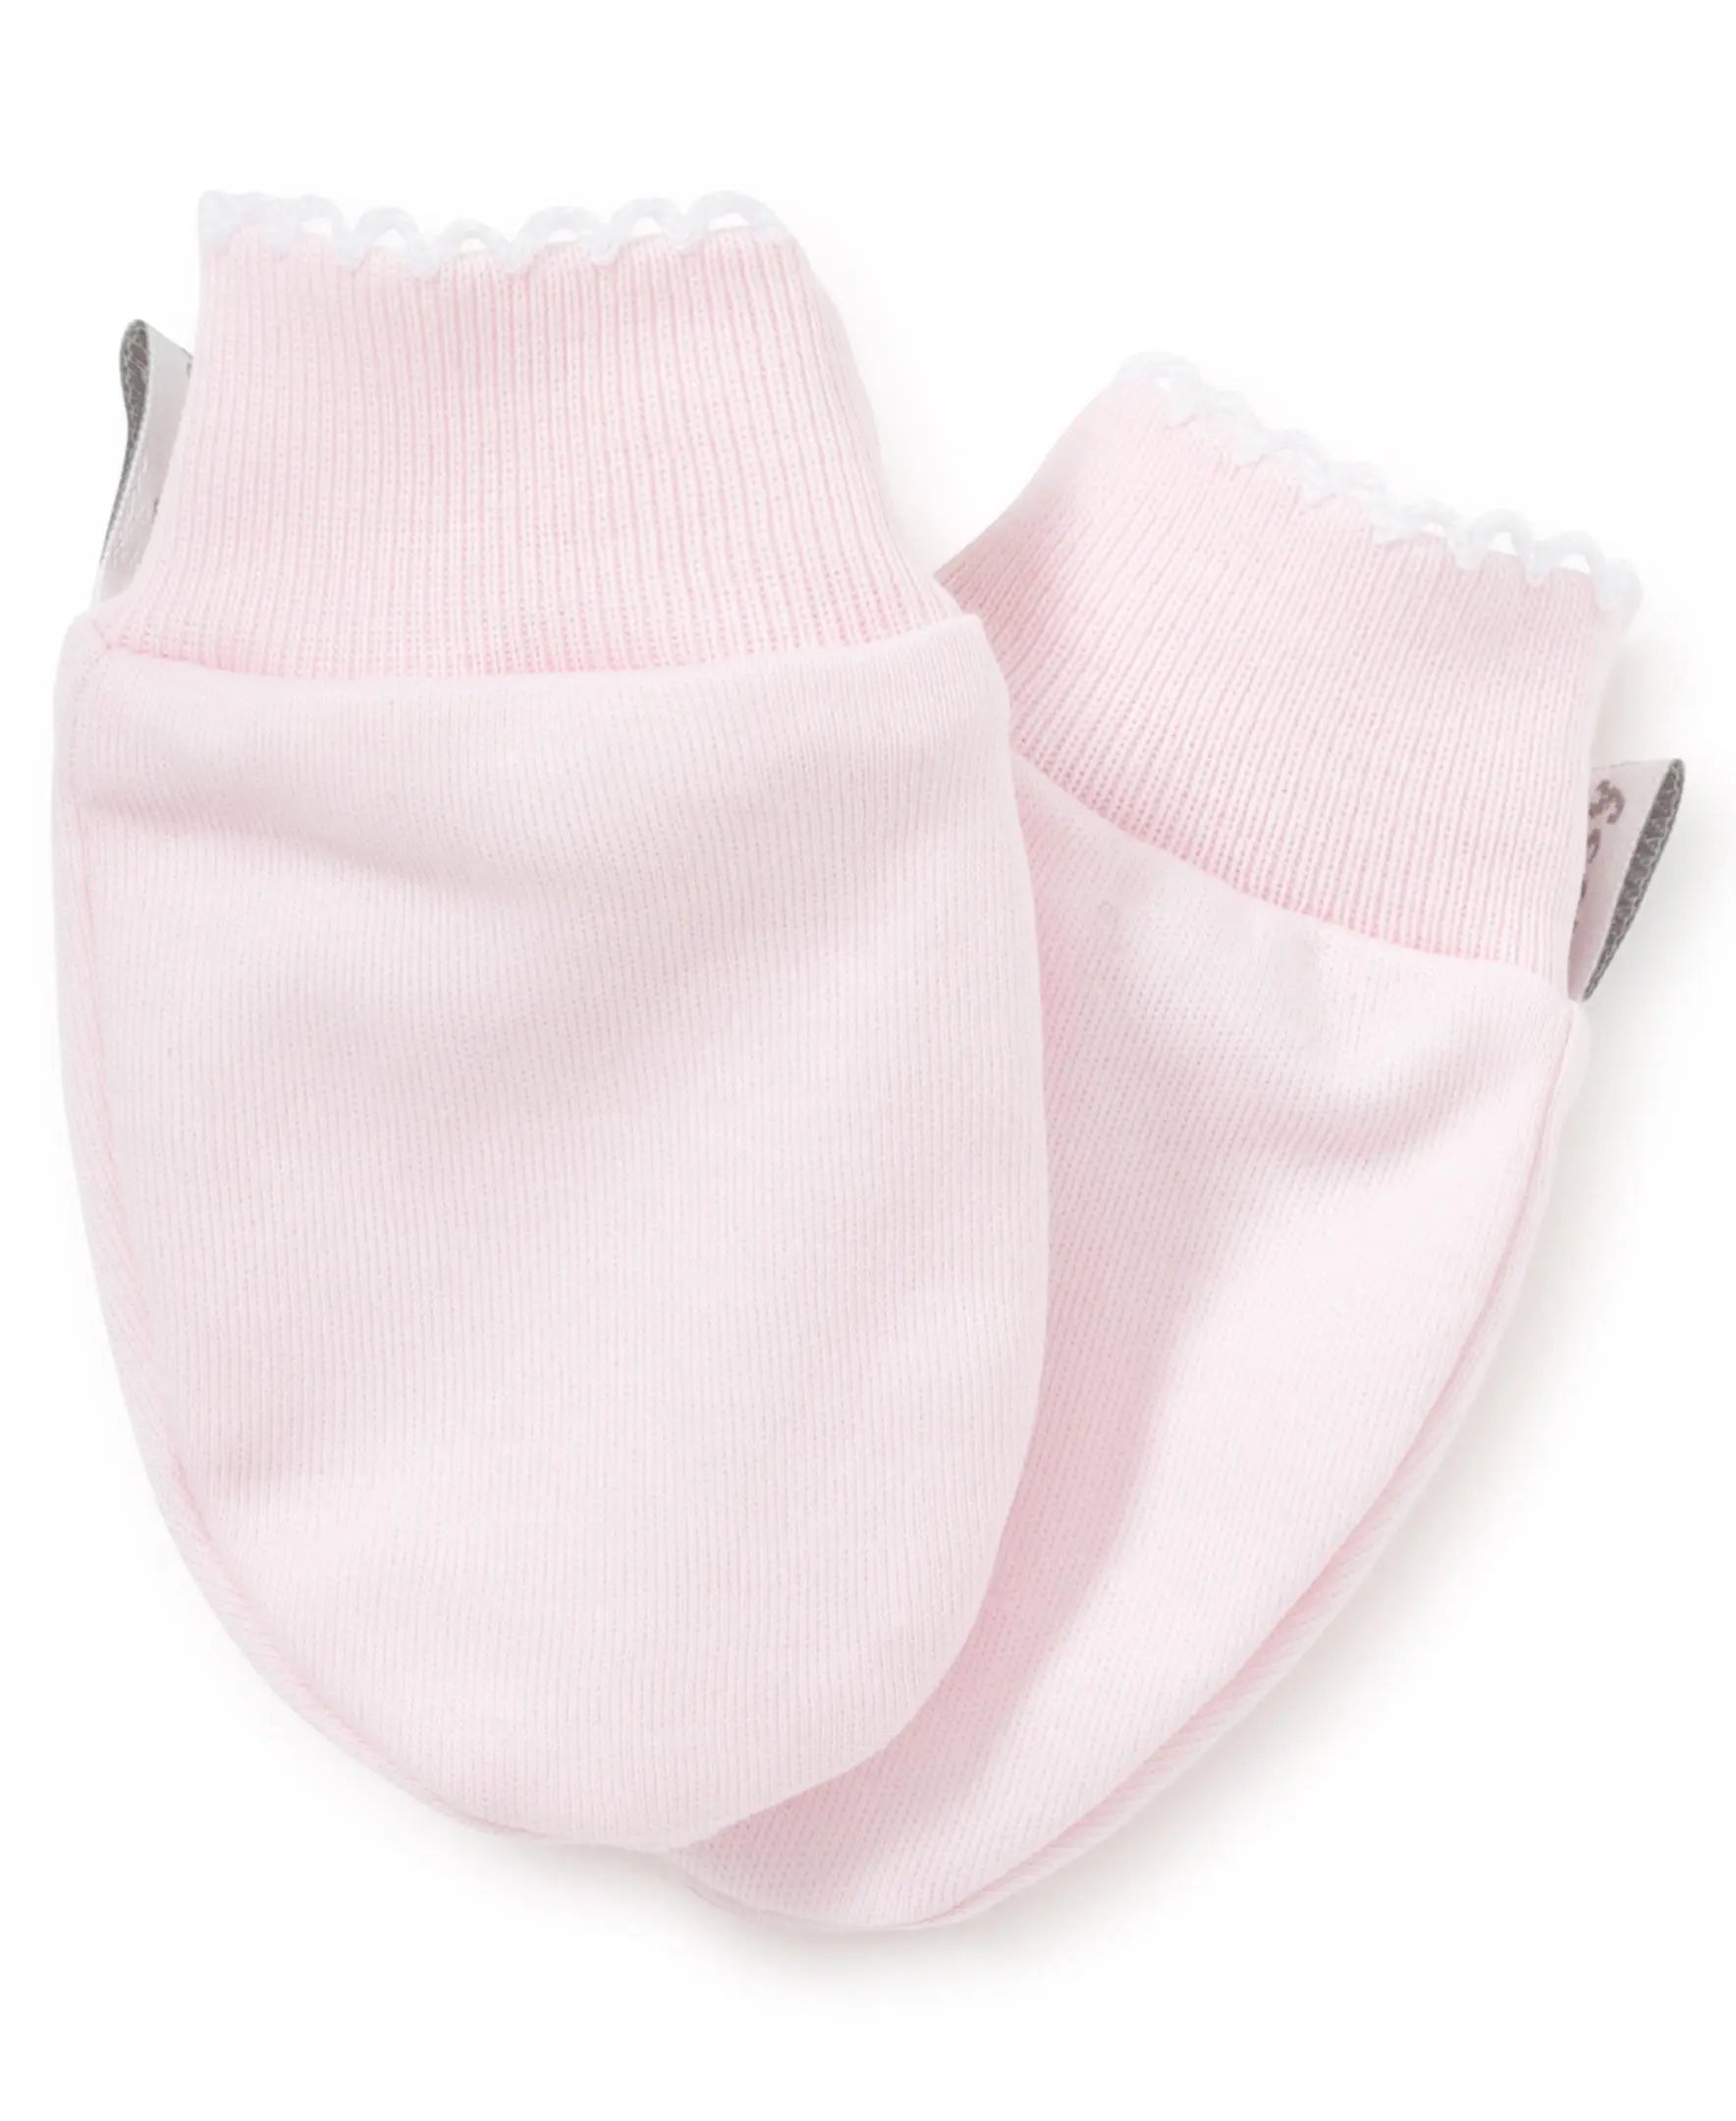 Baby girls mittens - solid pink-Booties, mittens & hats-Kissy Kissy-Blue Almonds-London-South Kensington